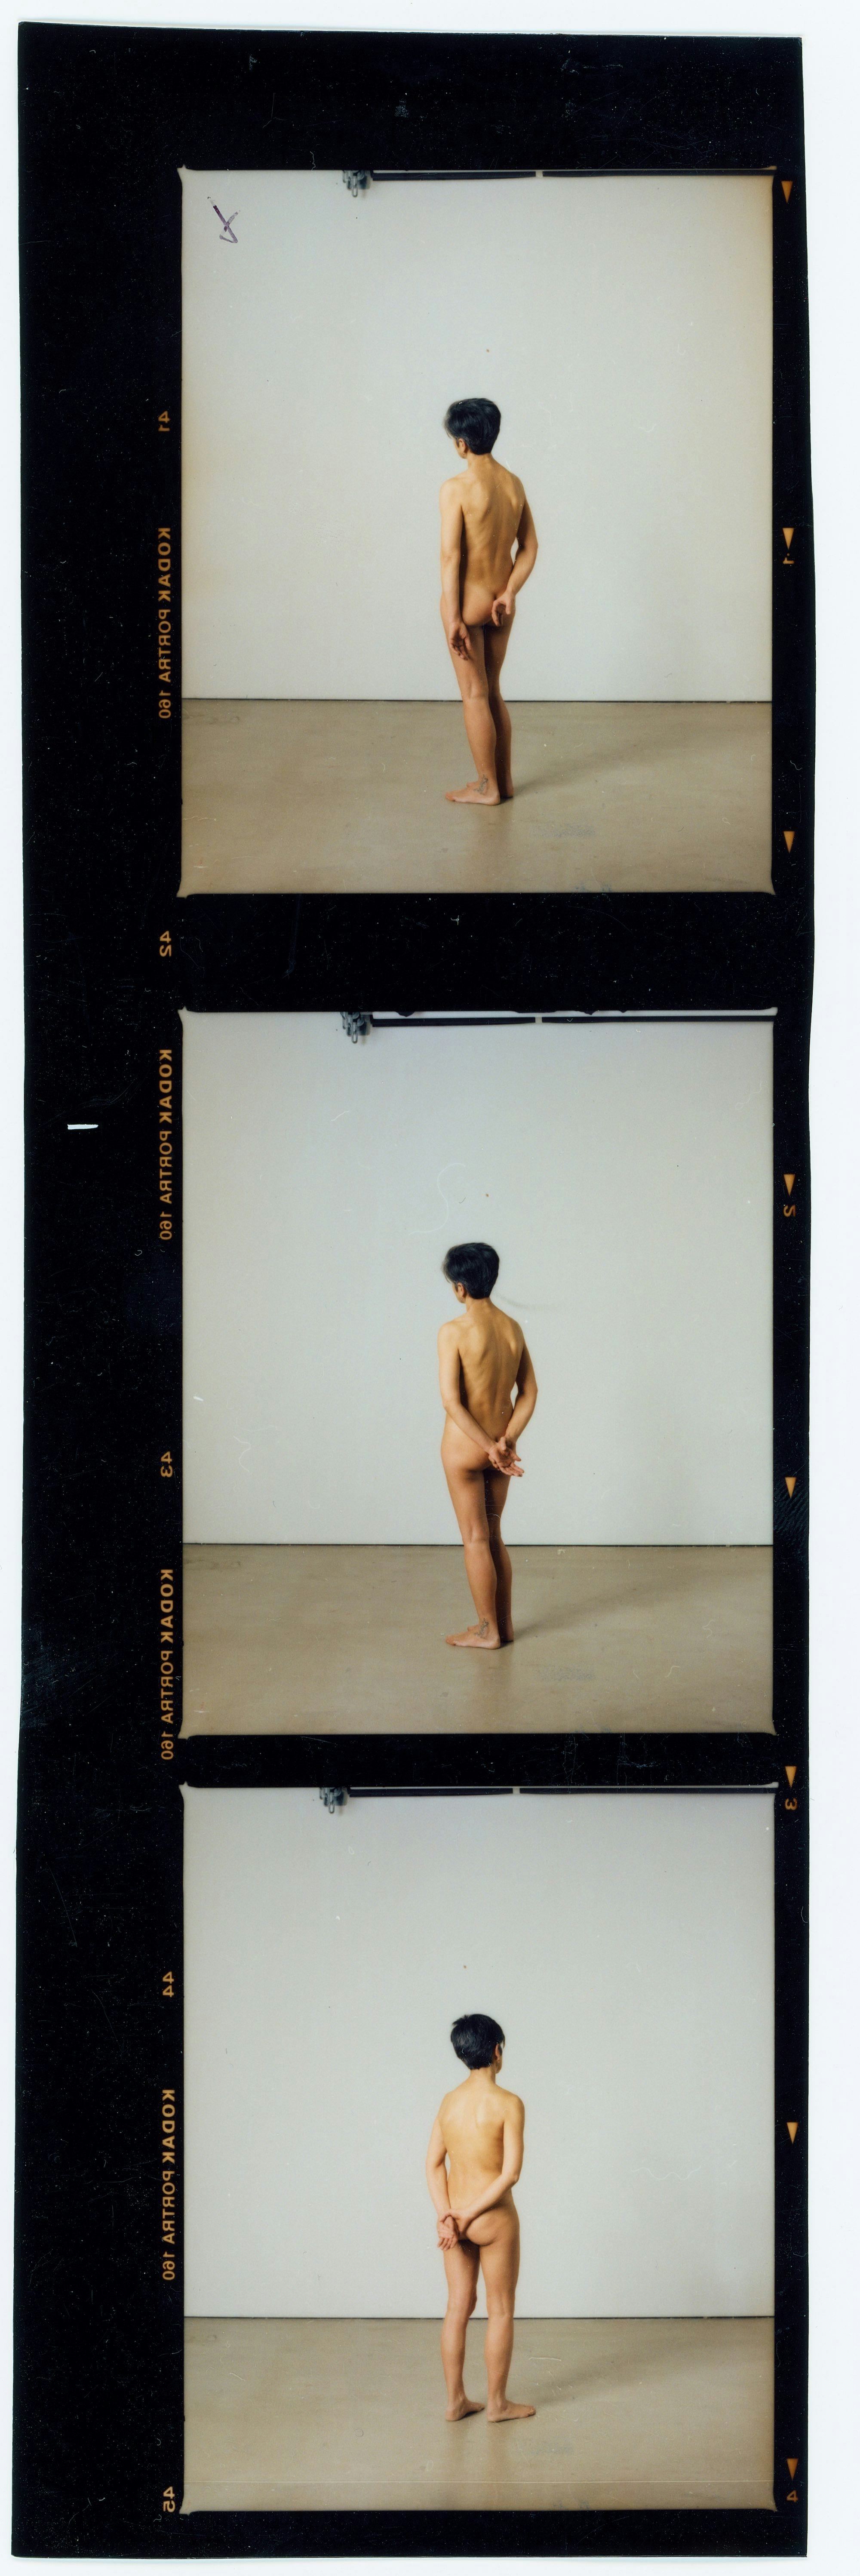 Contact sheet of three images showing the artist's mother posing undressed. © Eleonora Agostini